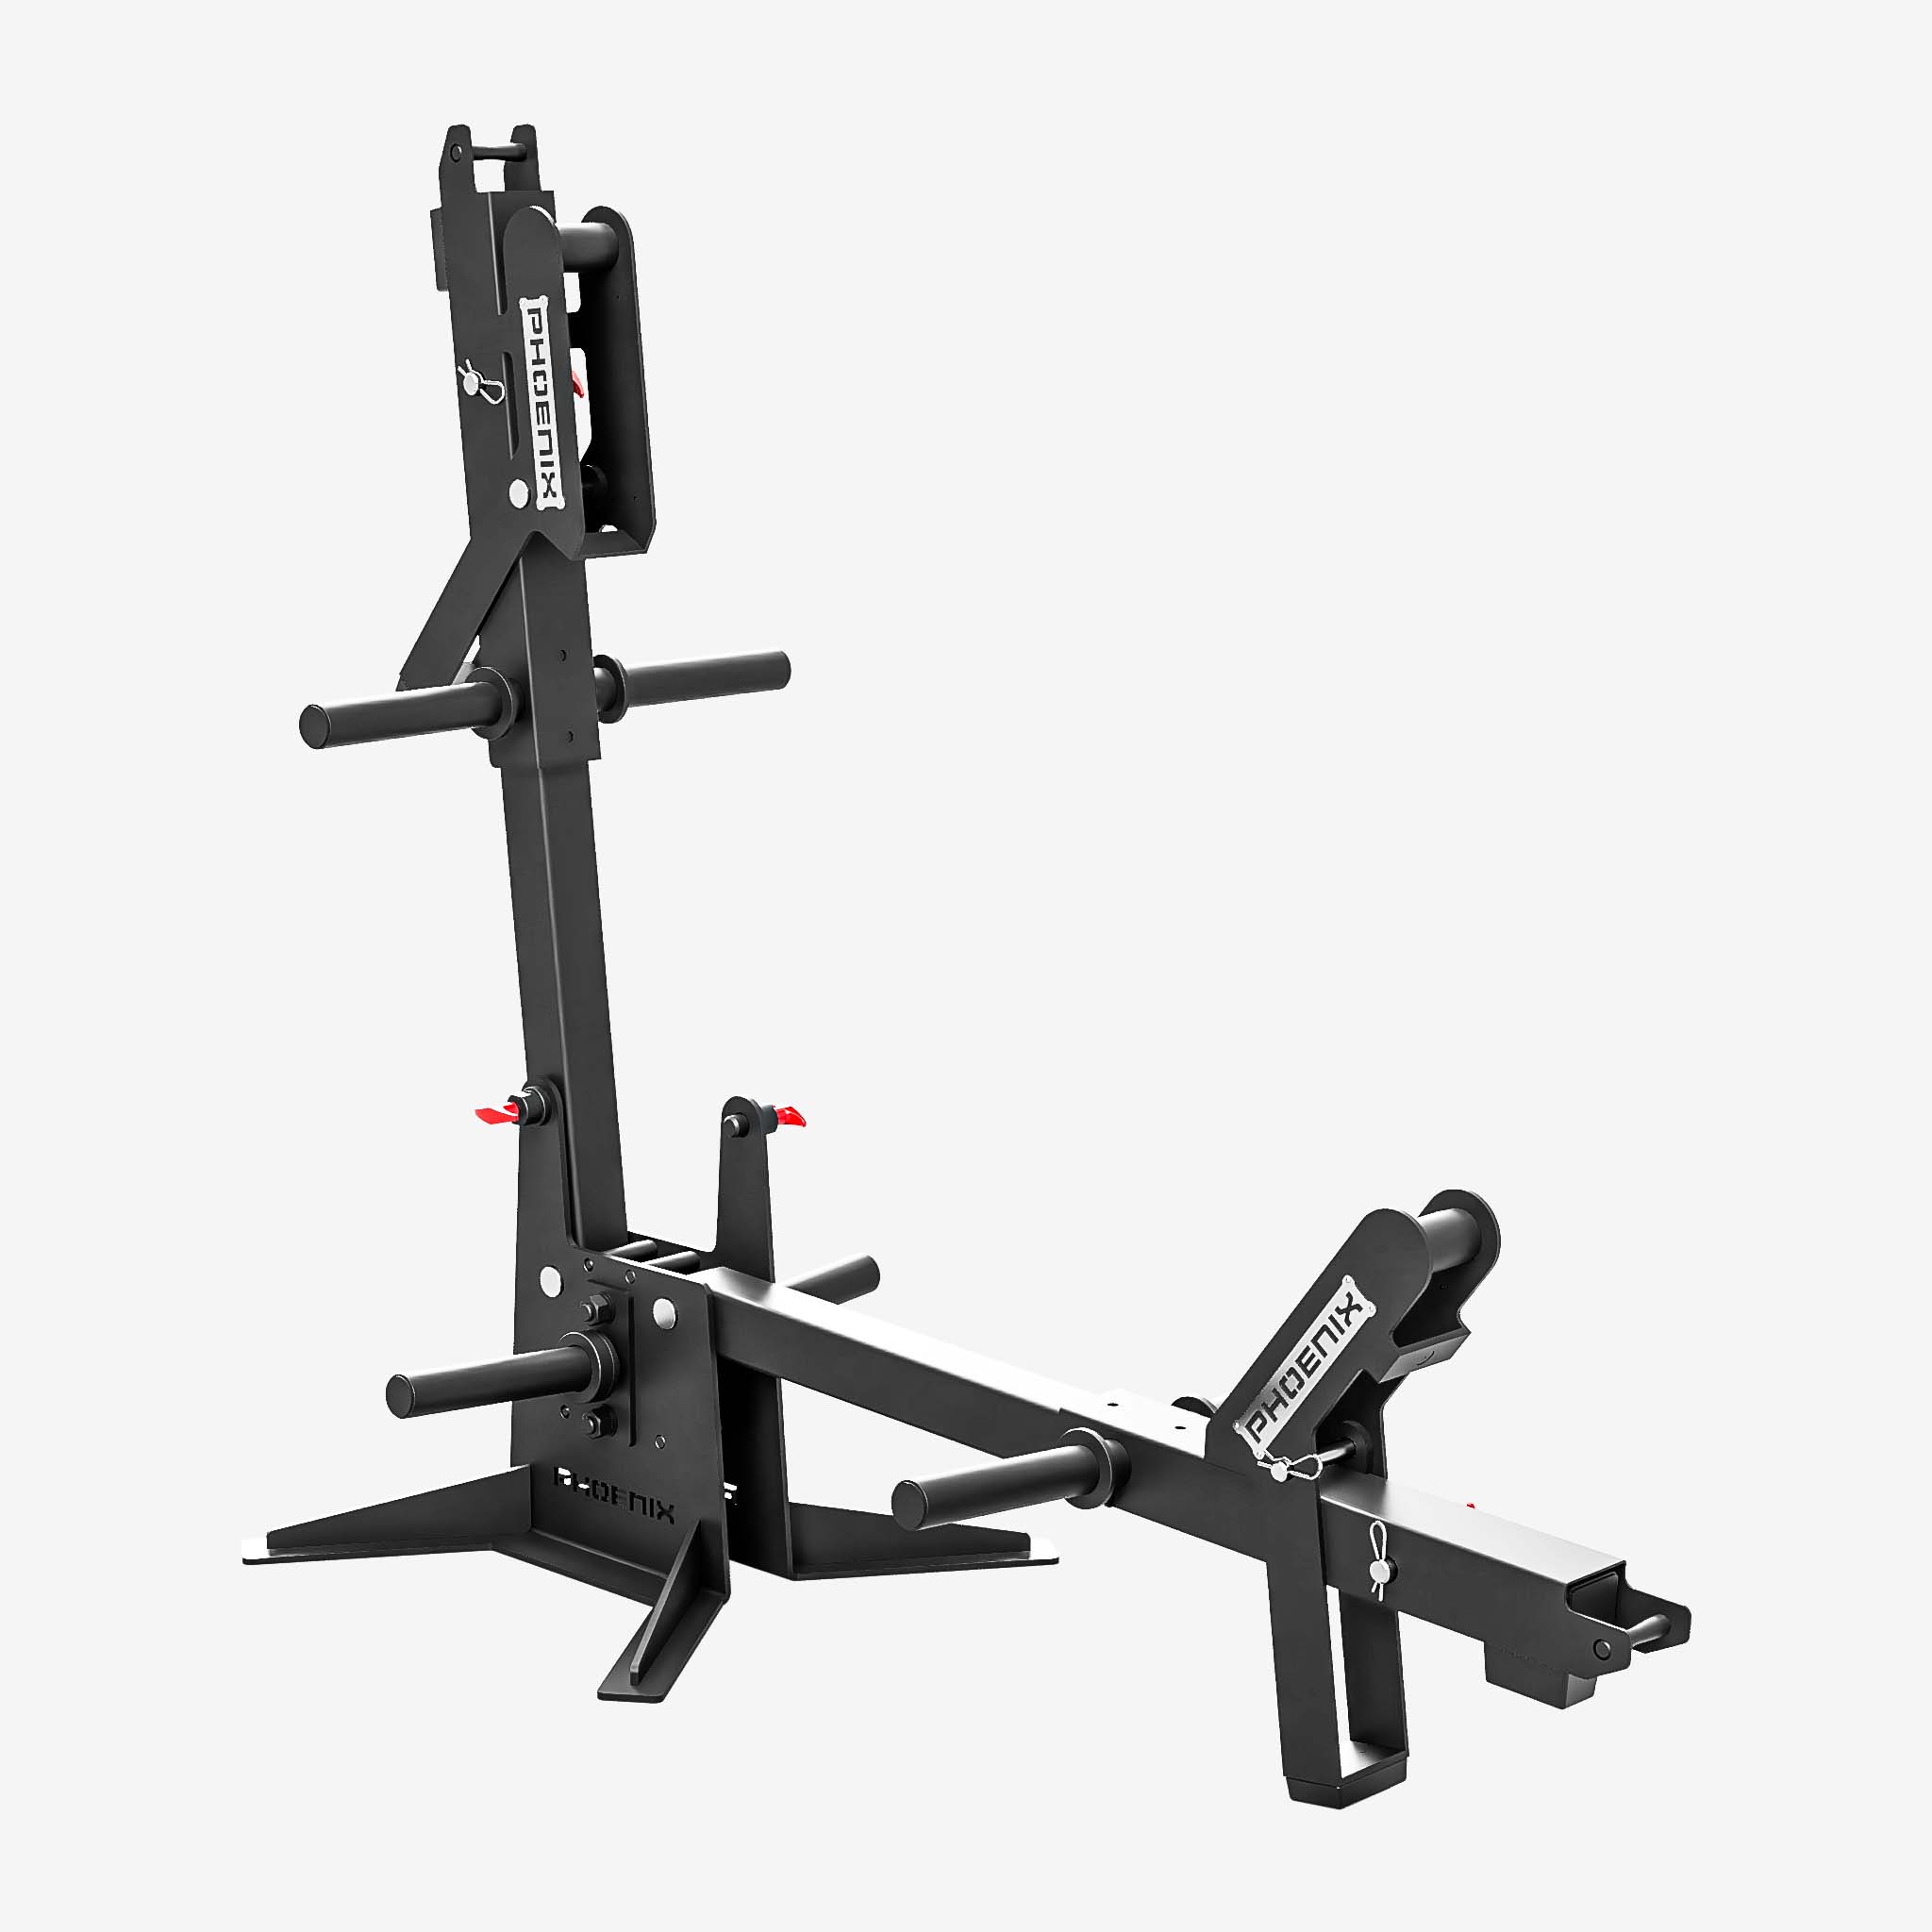 Featured image for “J Belt Squat - Free Standing X Frame - Dual Axel”